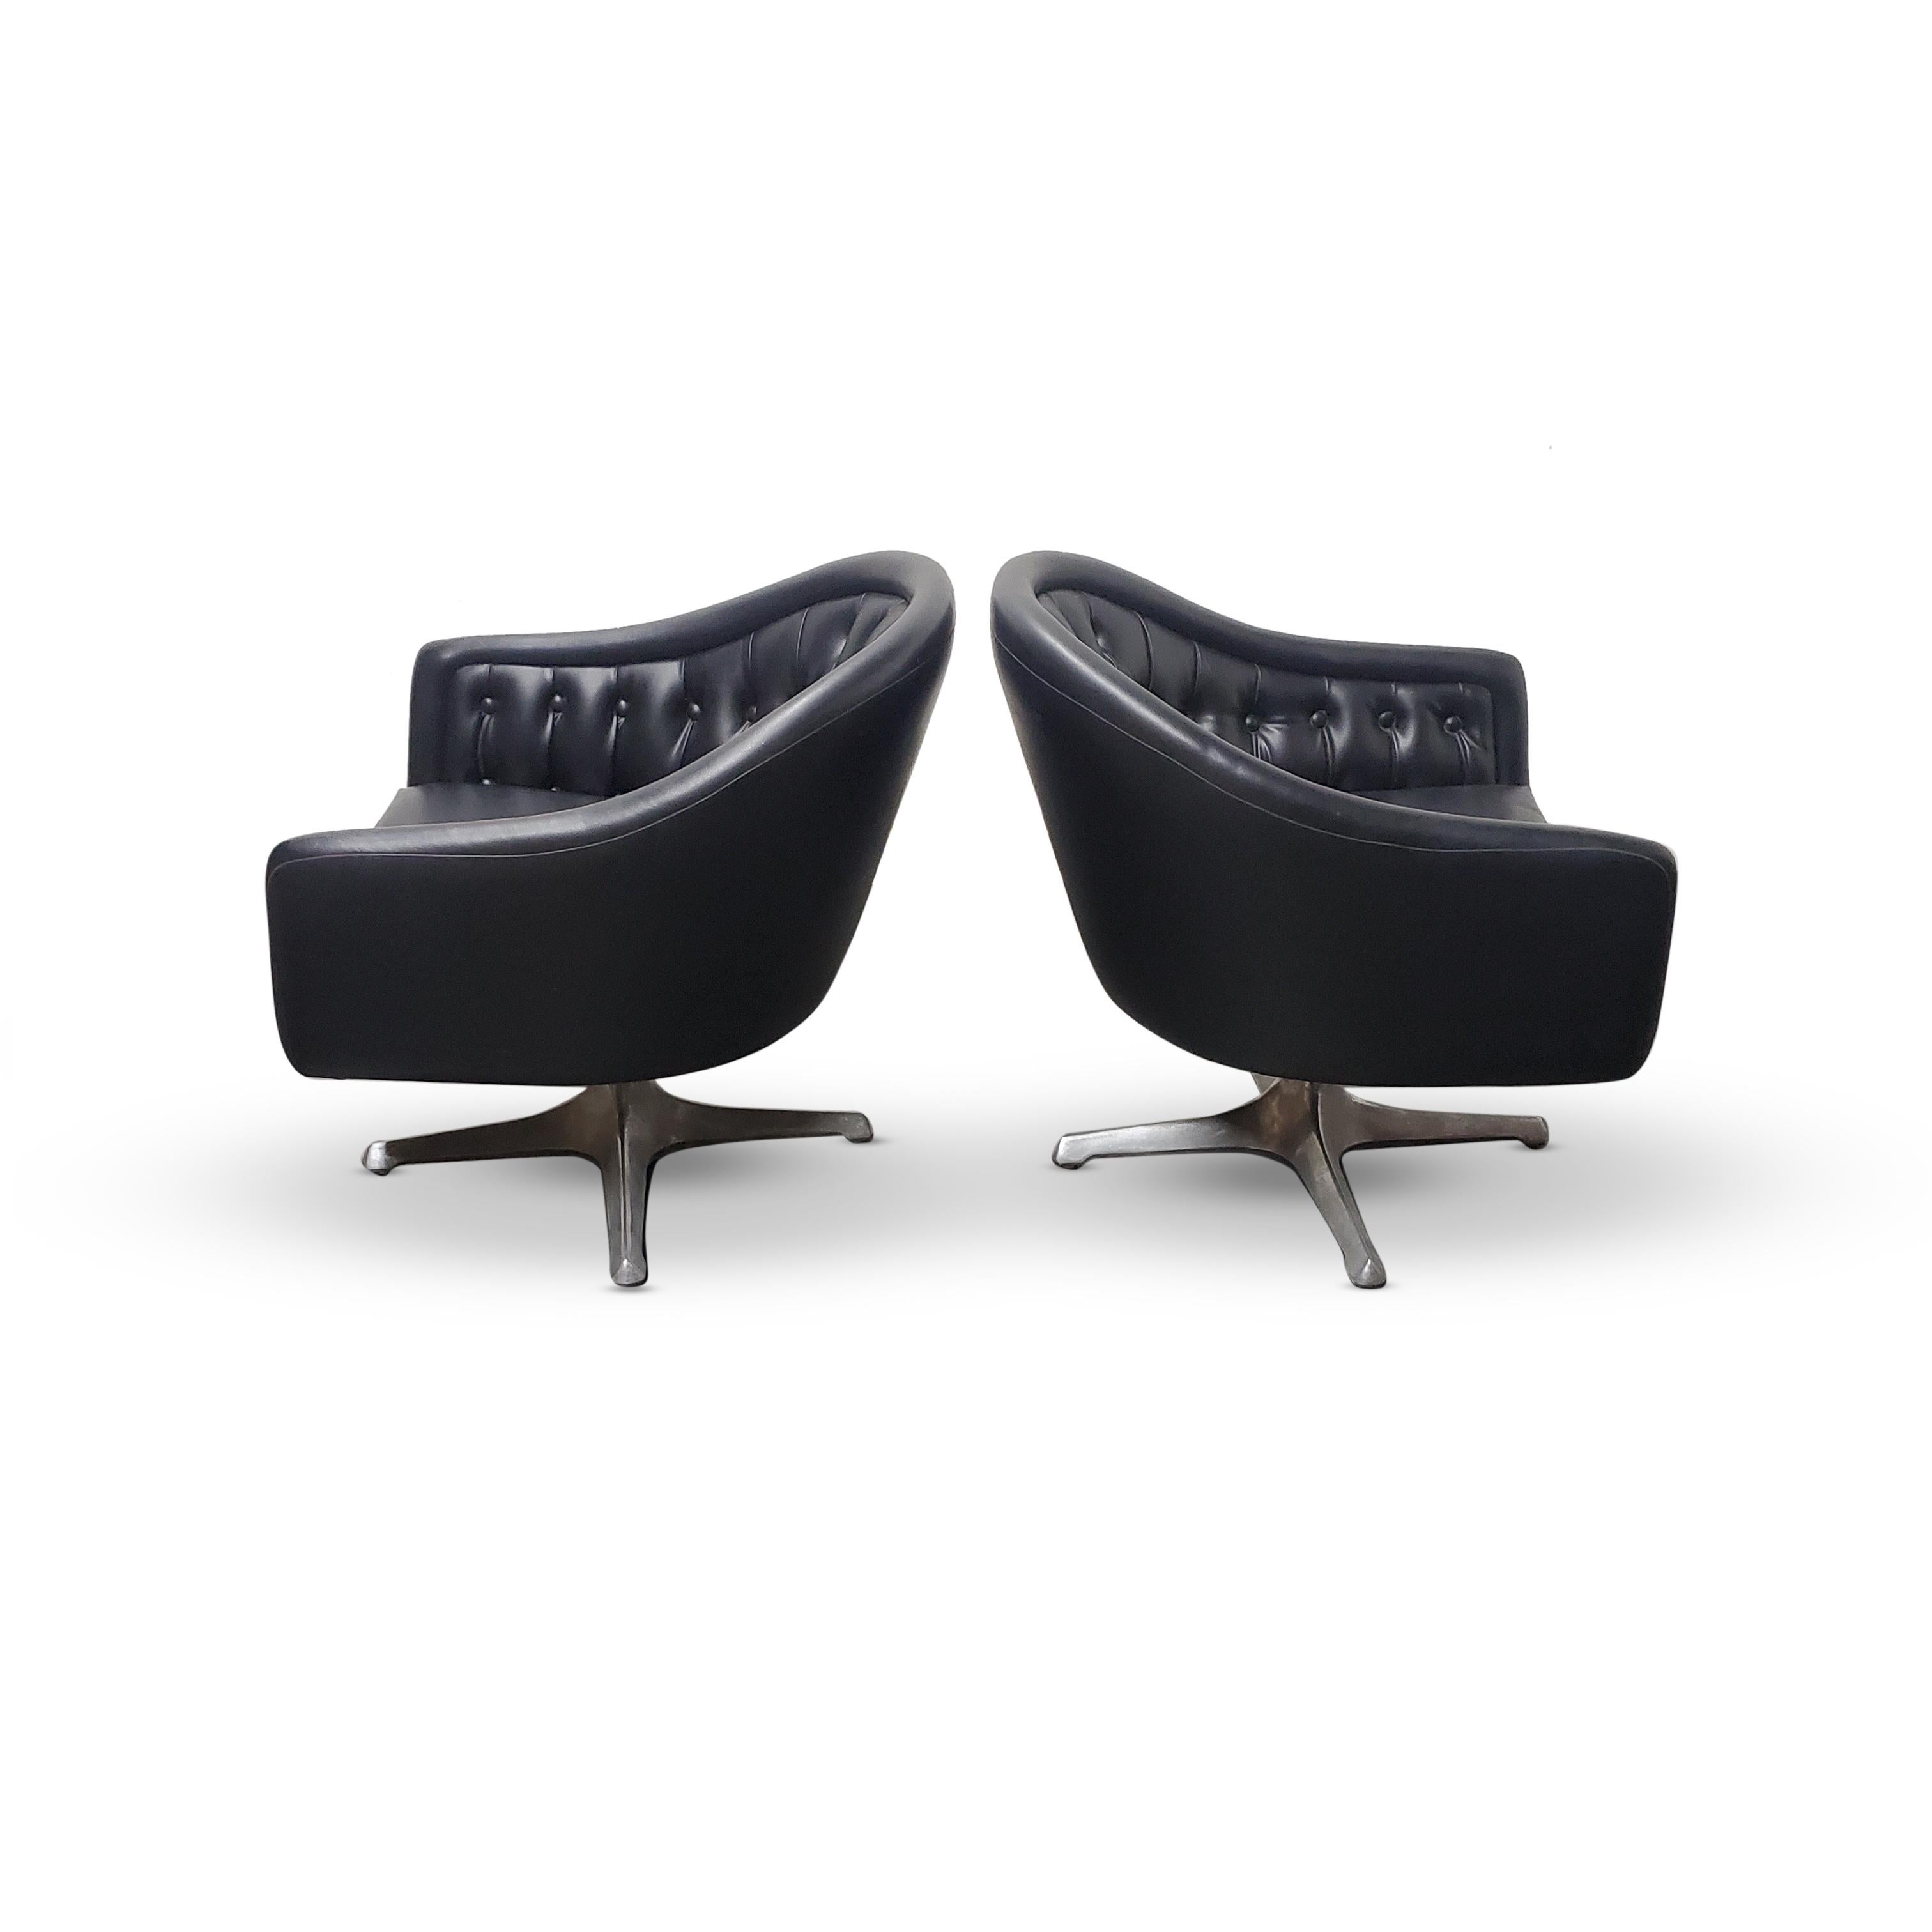 American Pair of Chromcraft Black Tufted Swivel Lounge Chairs  